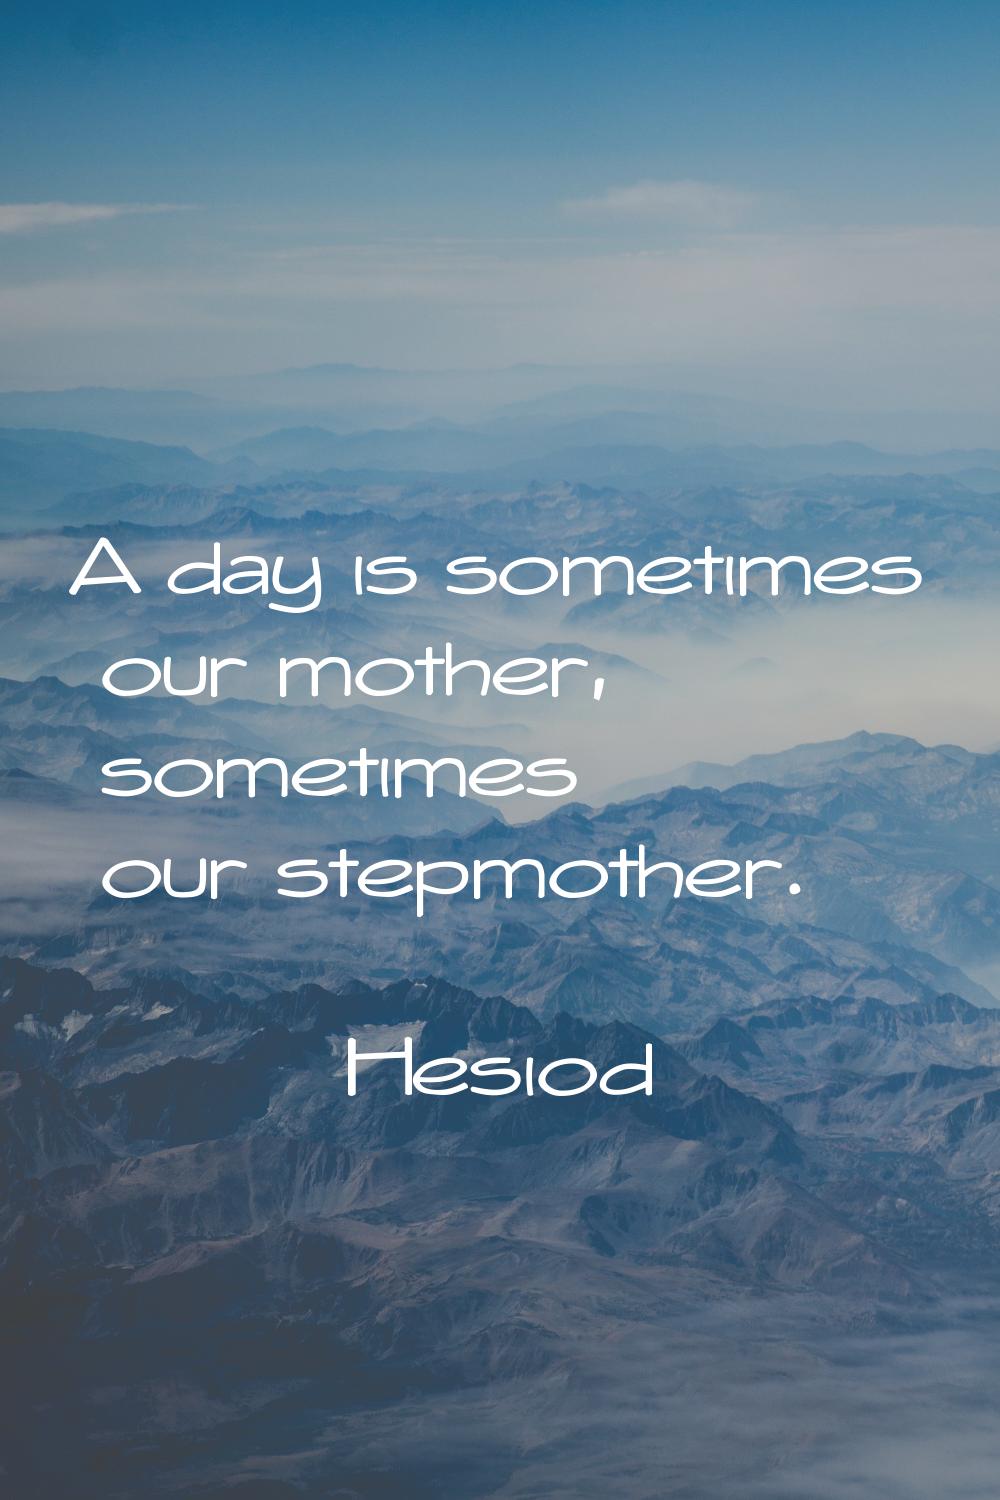 A day is sometimes our mother, sometimes our stepmother.